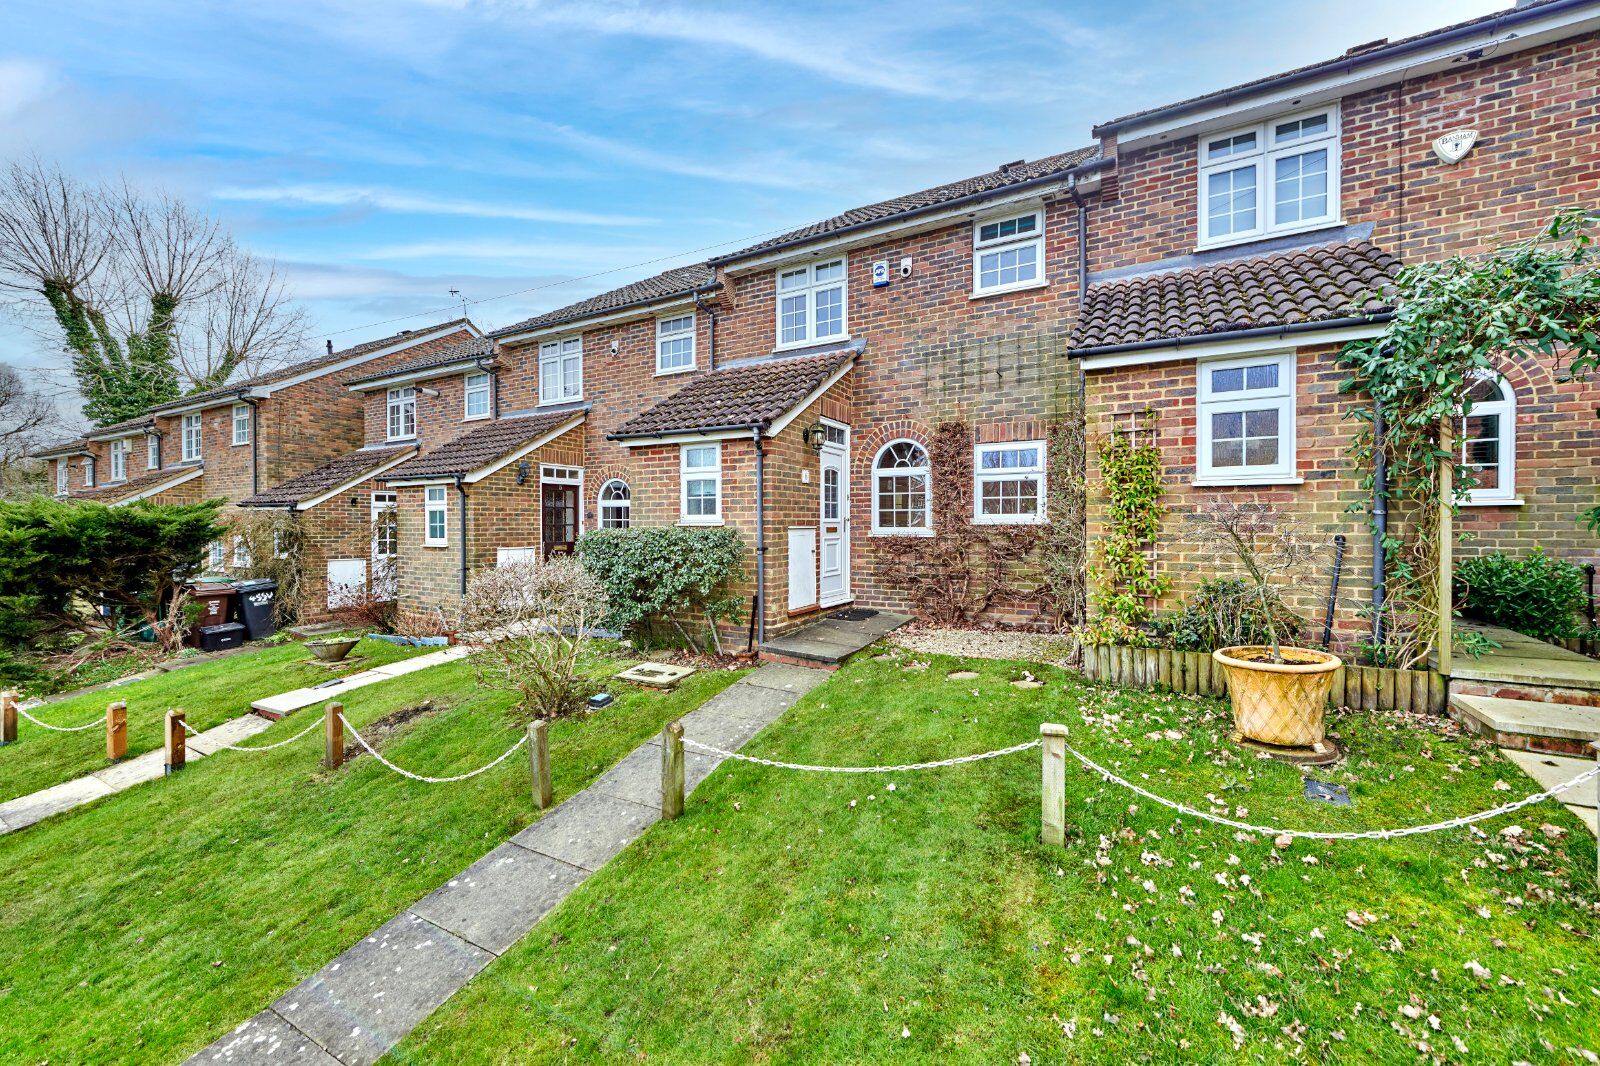 3 bedroom mid terraced house for sale St. Saviours View, Lemsford Road, AL1, main image